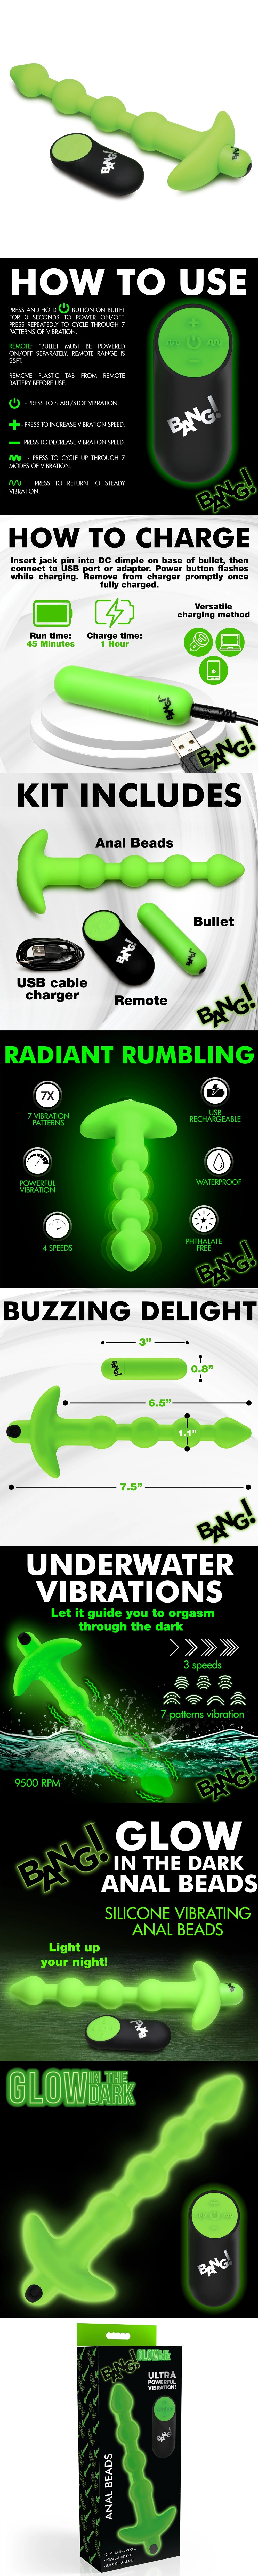 Bang! Glow-in-the-Dark Silicone Anal Beads Butt Plug